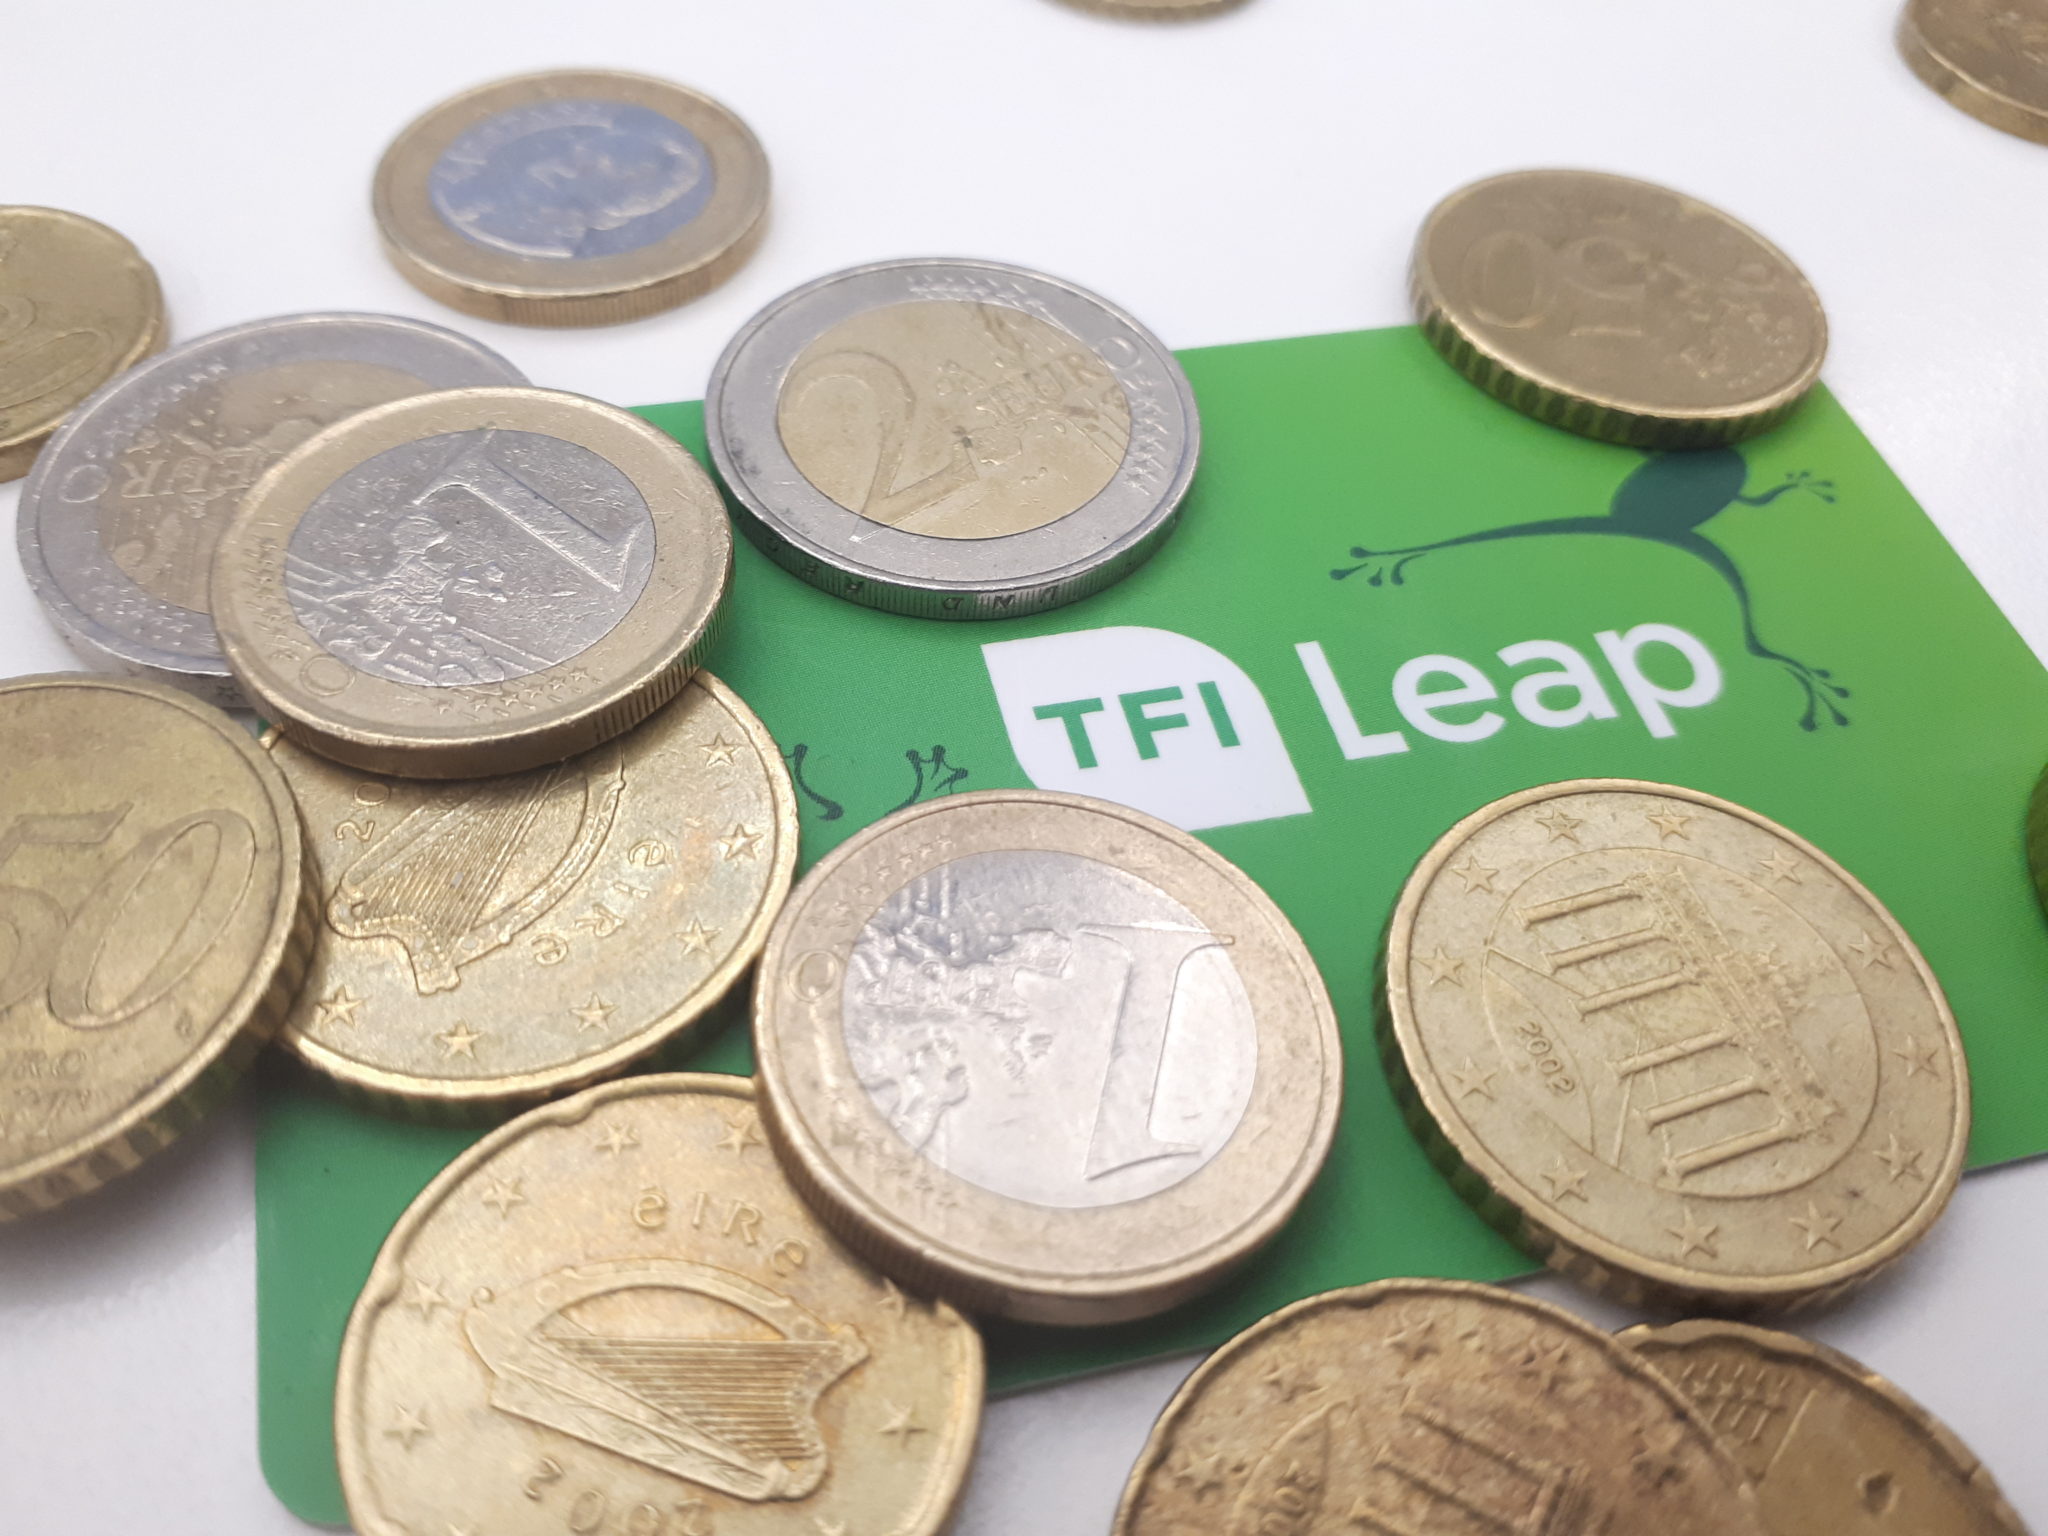 new-plans-to-see-leap-card-replaced-by-contactless-payment-newstalk